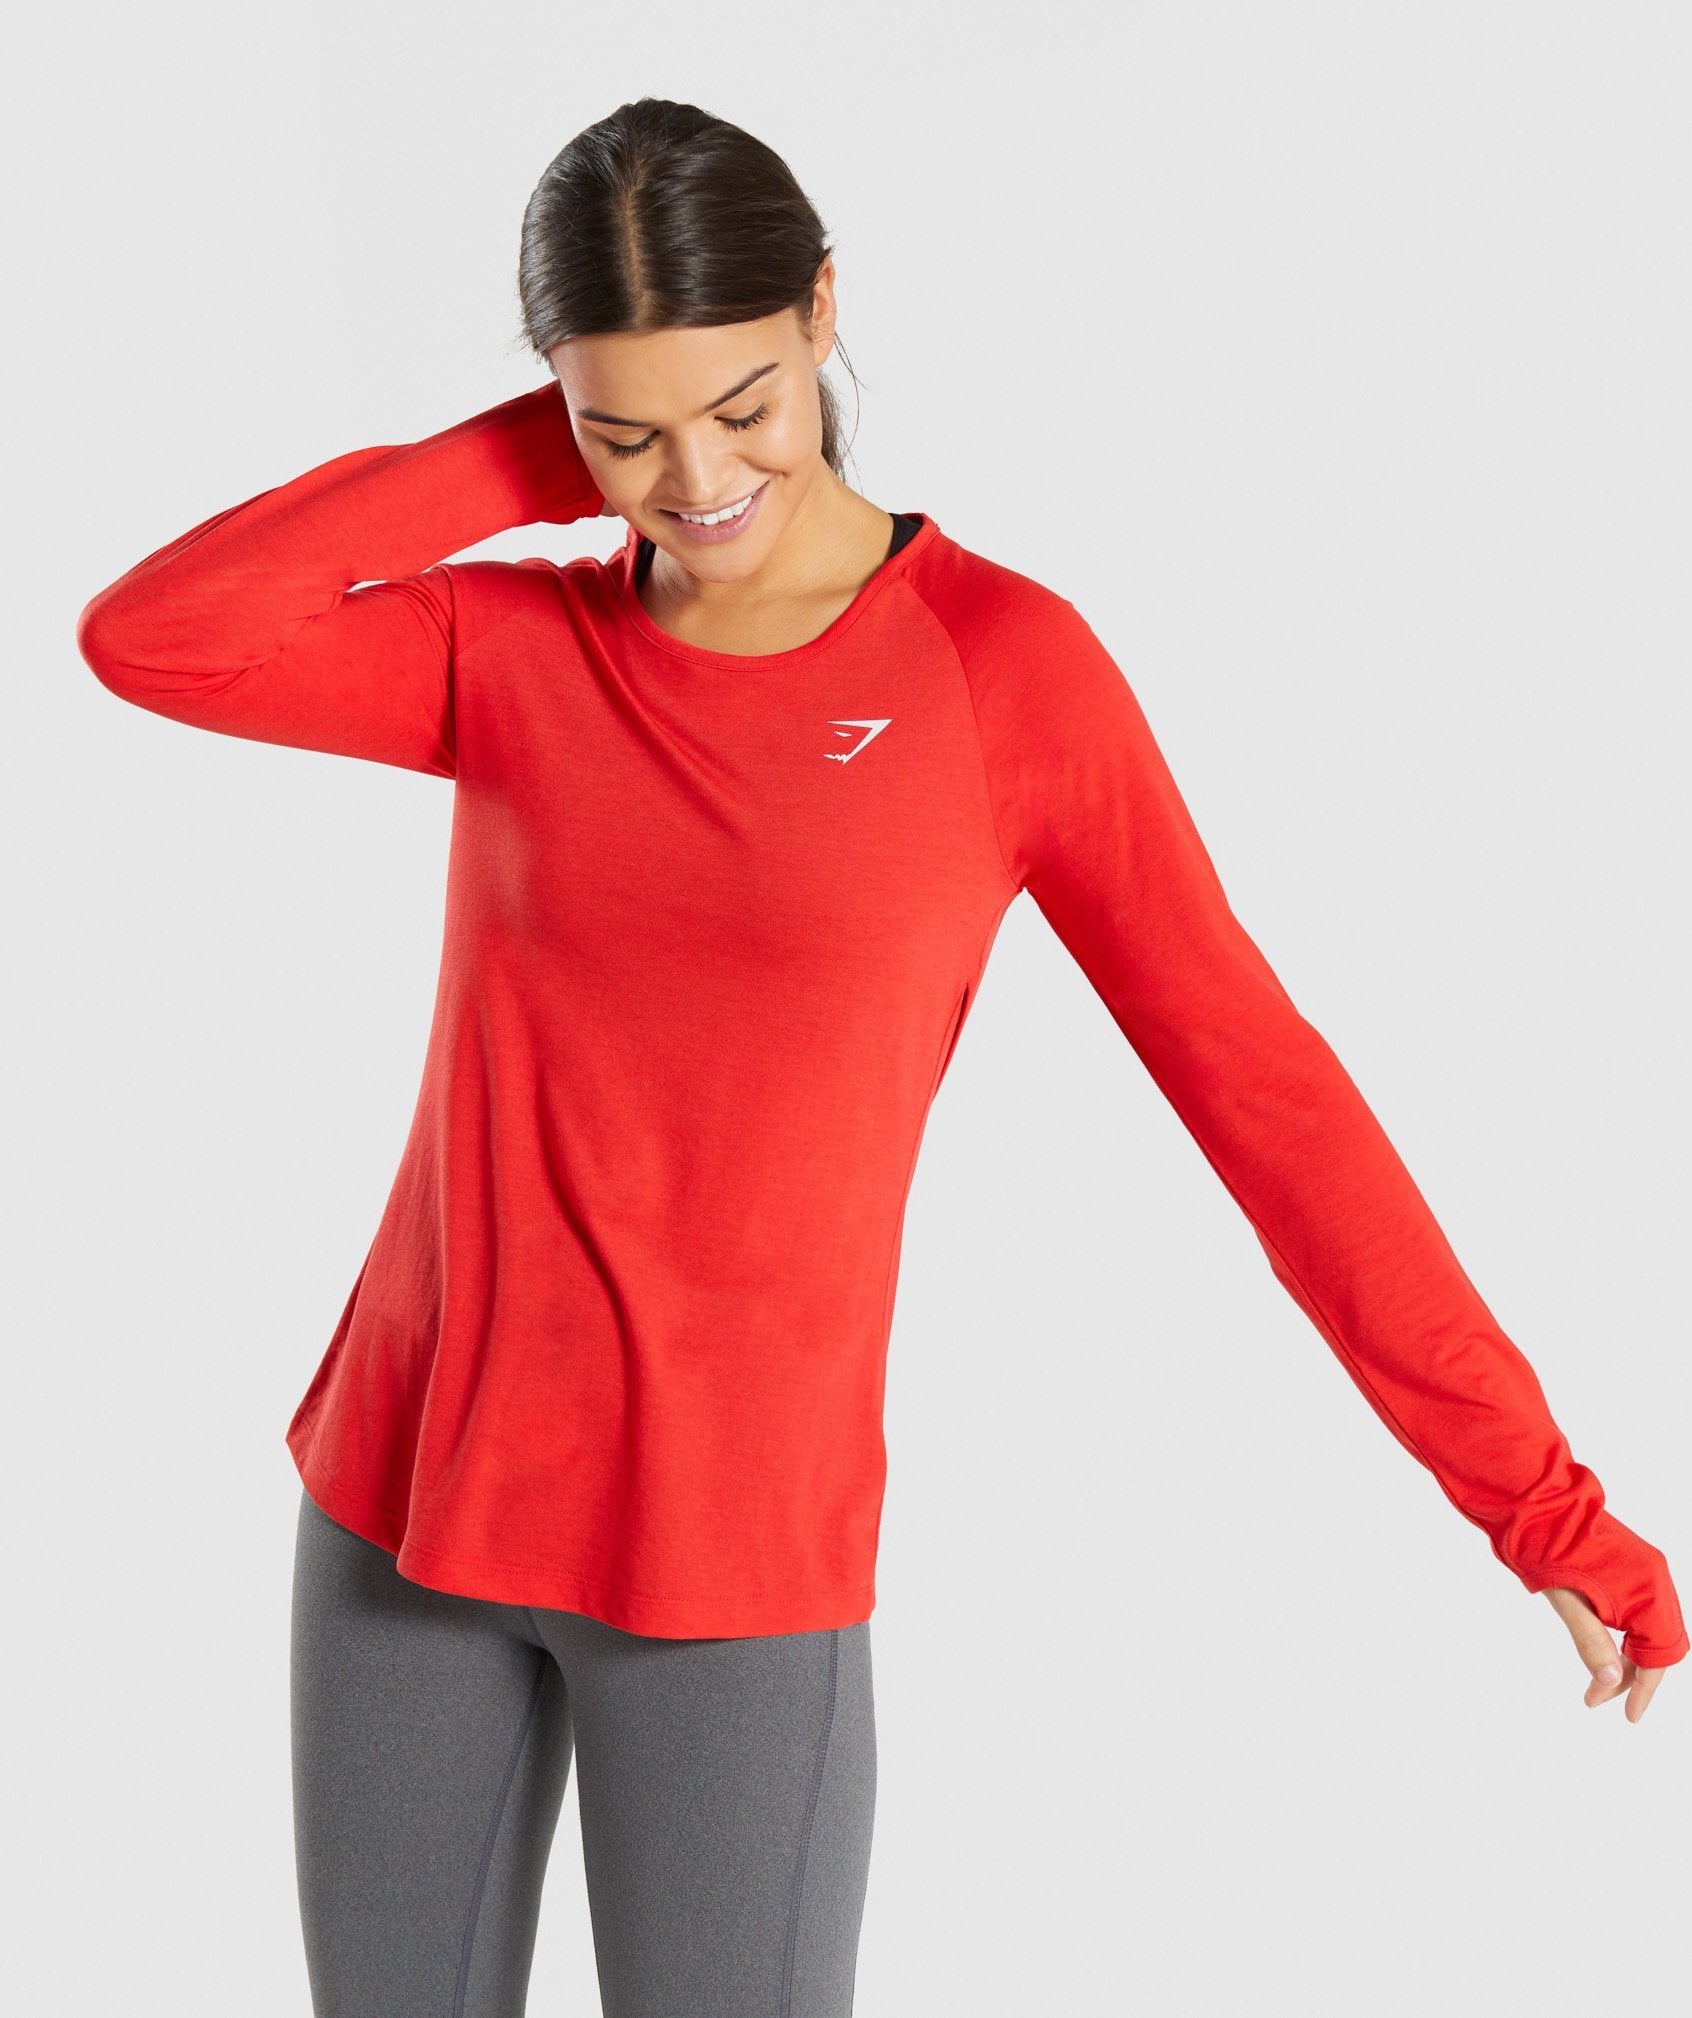 Primary Open Cross Back Long Sleeve in Pop Red - view 1